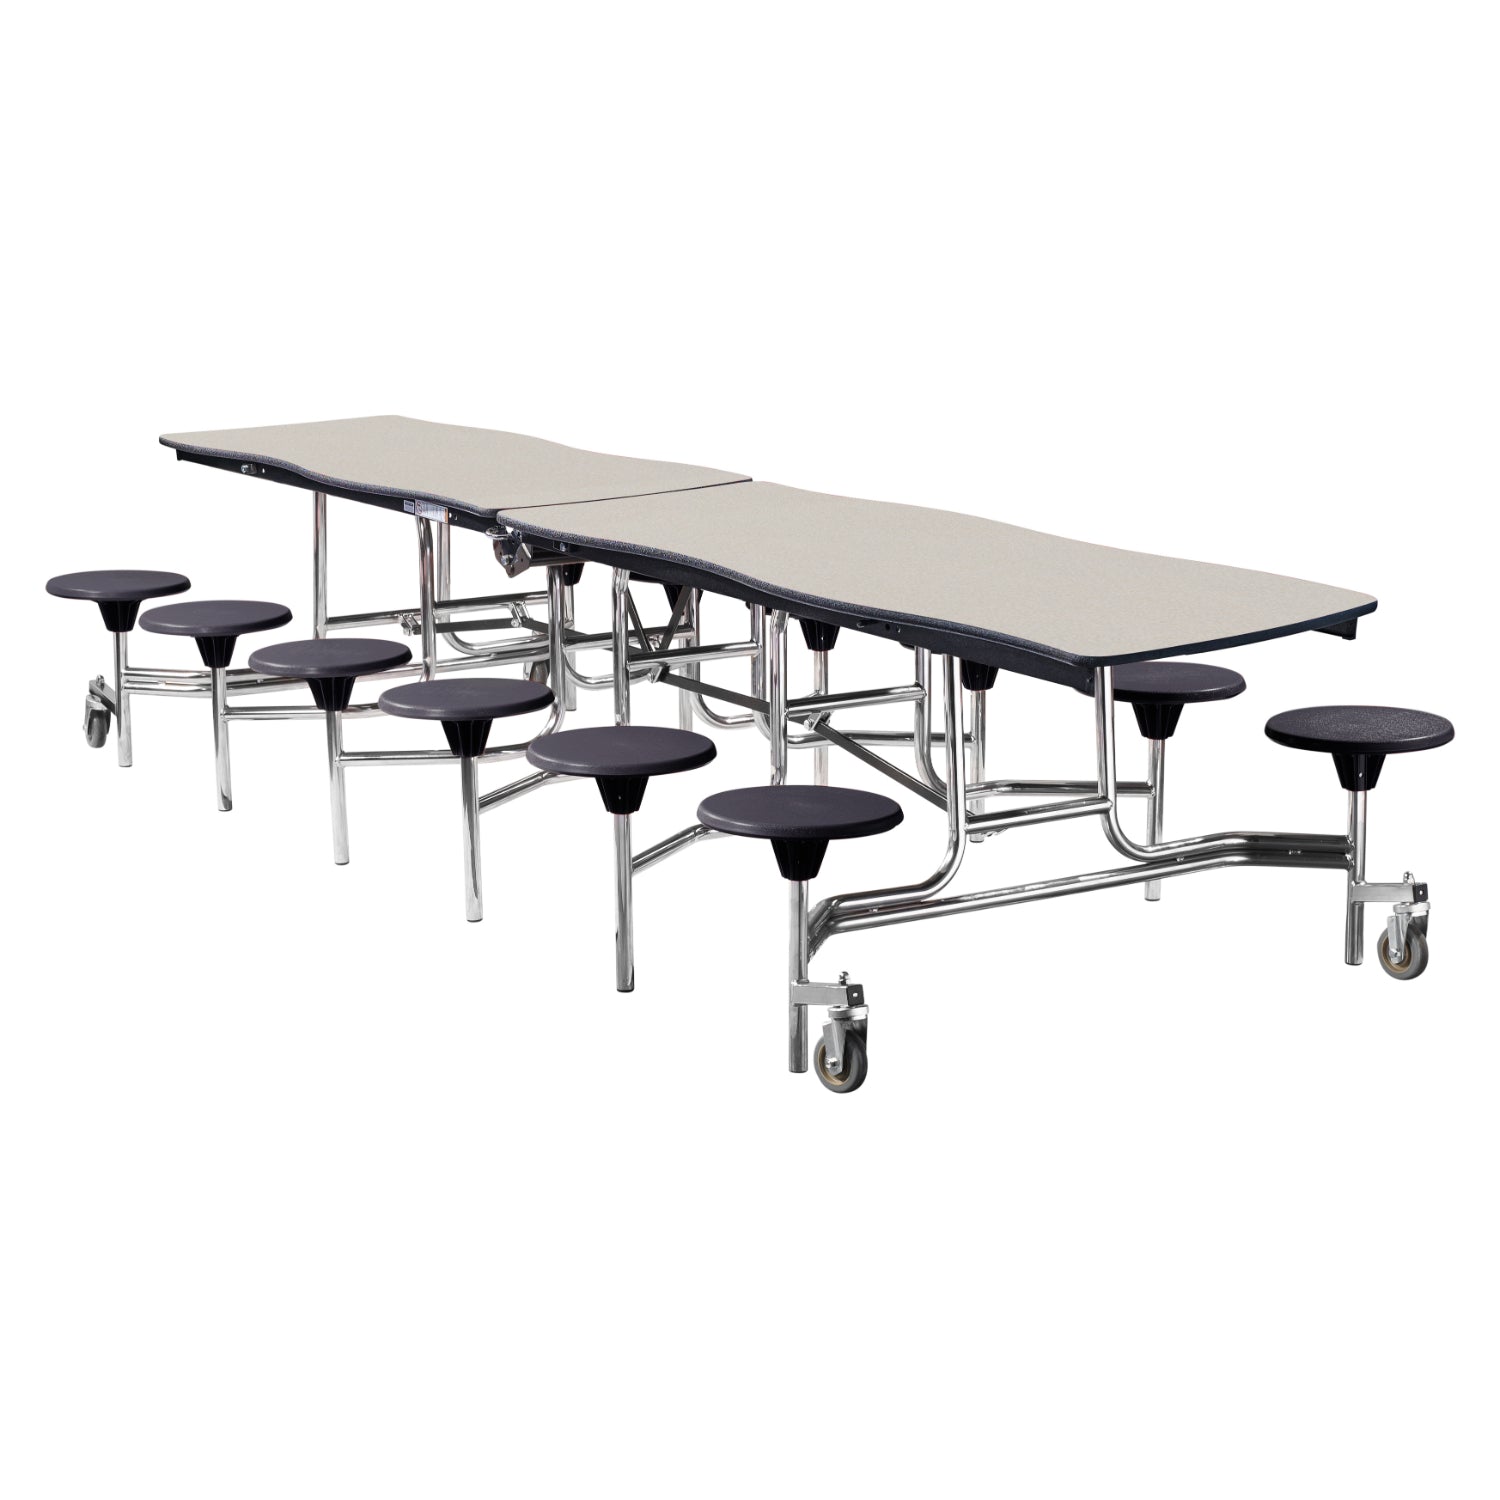 Mobile Cafeteria Table with 12 Stools, 12' Swerve, Plywood Core, Vinyl T-Mold Edge, Chrome Frame